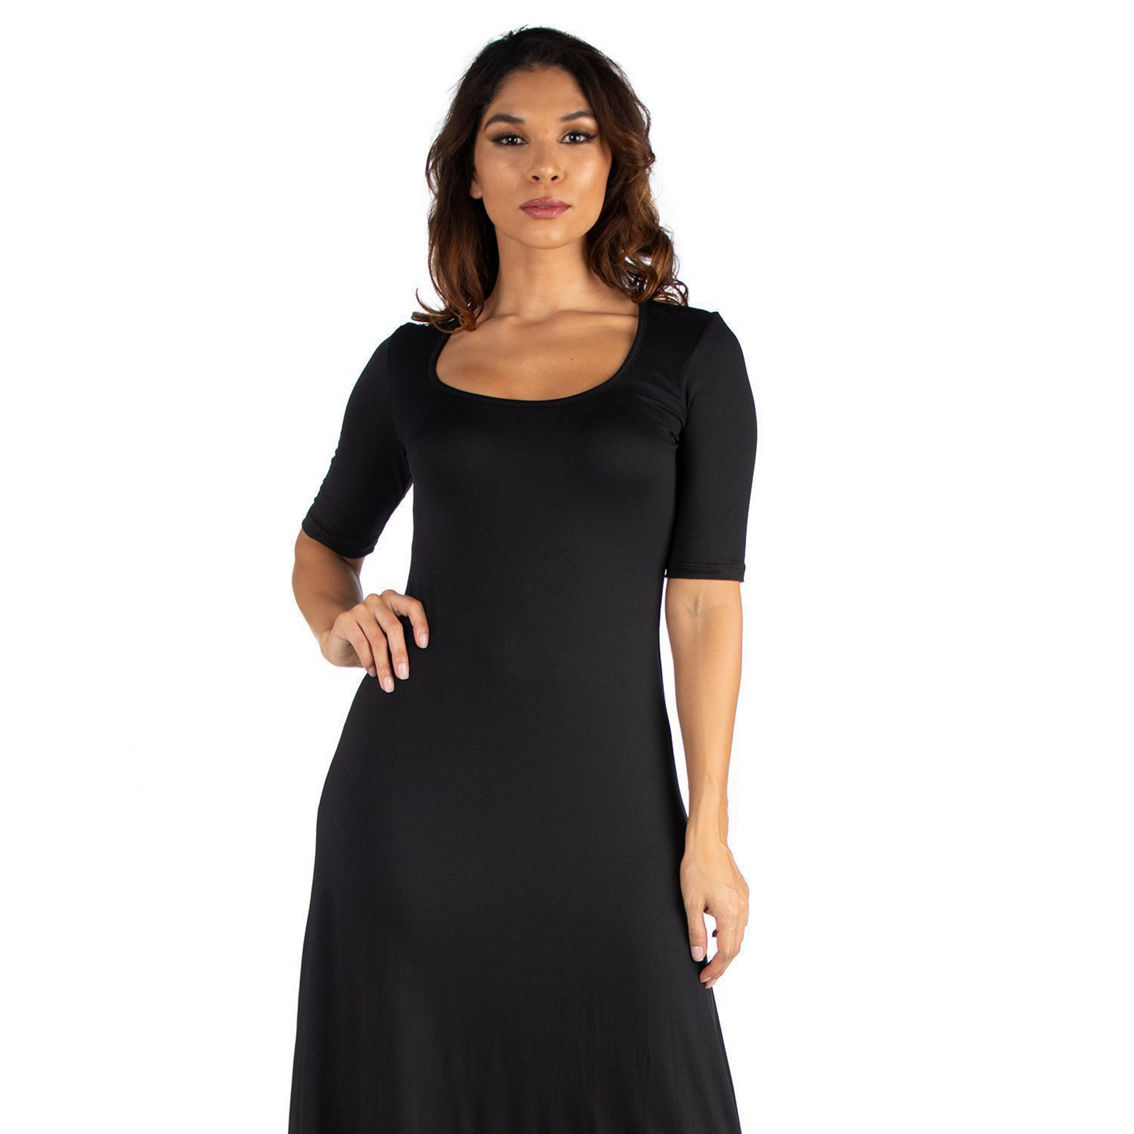 24seven Comfort Apparel Womens Casual Maxi Dress With Sleeves